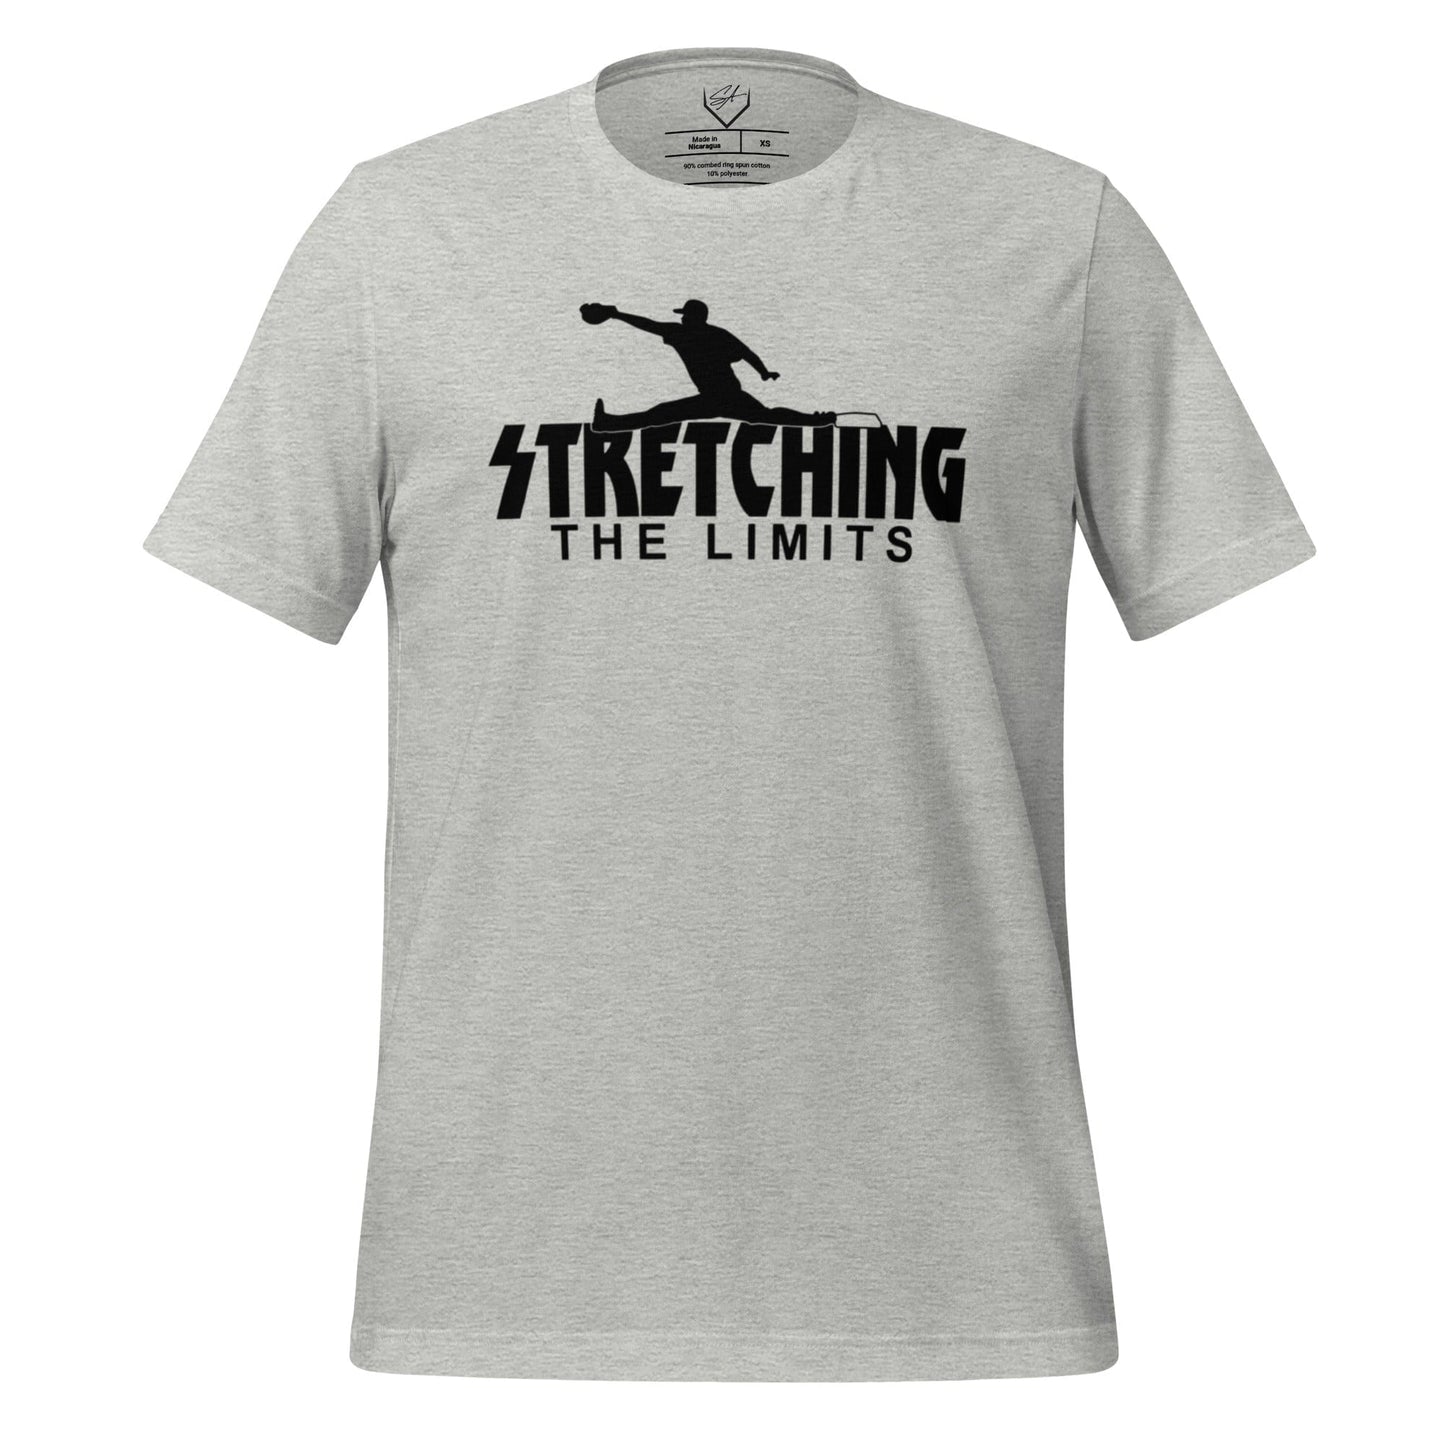 Stretching The Limits - Adult Tee